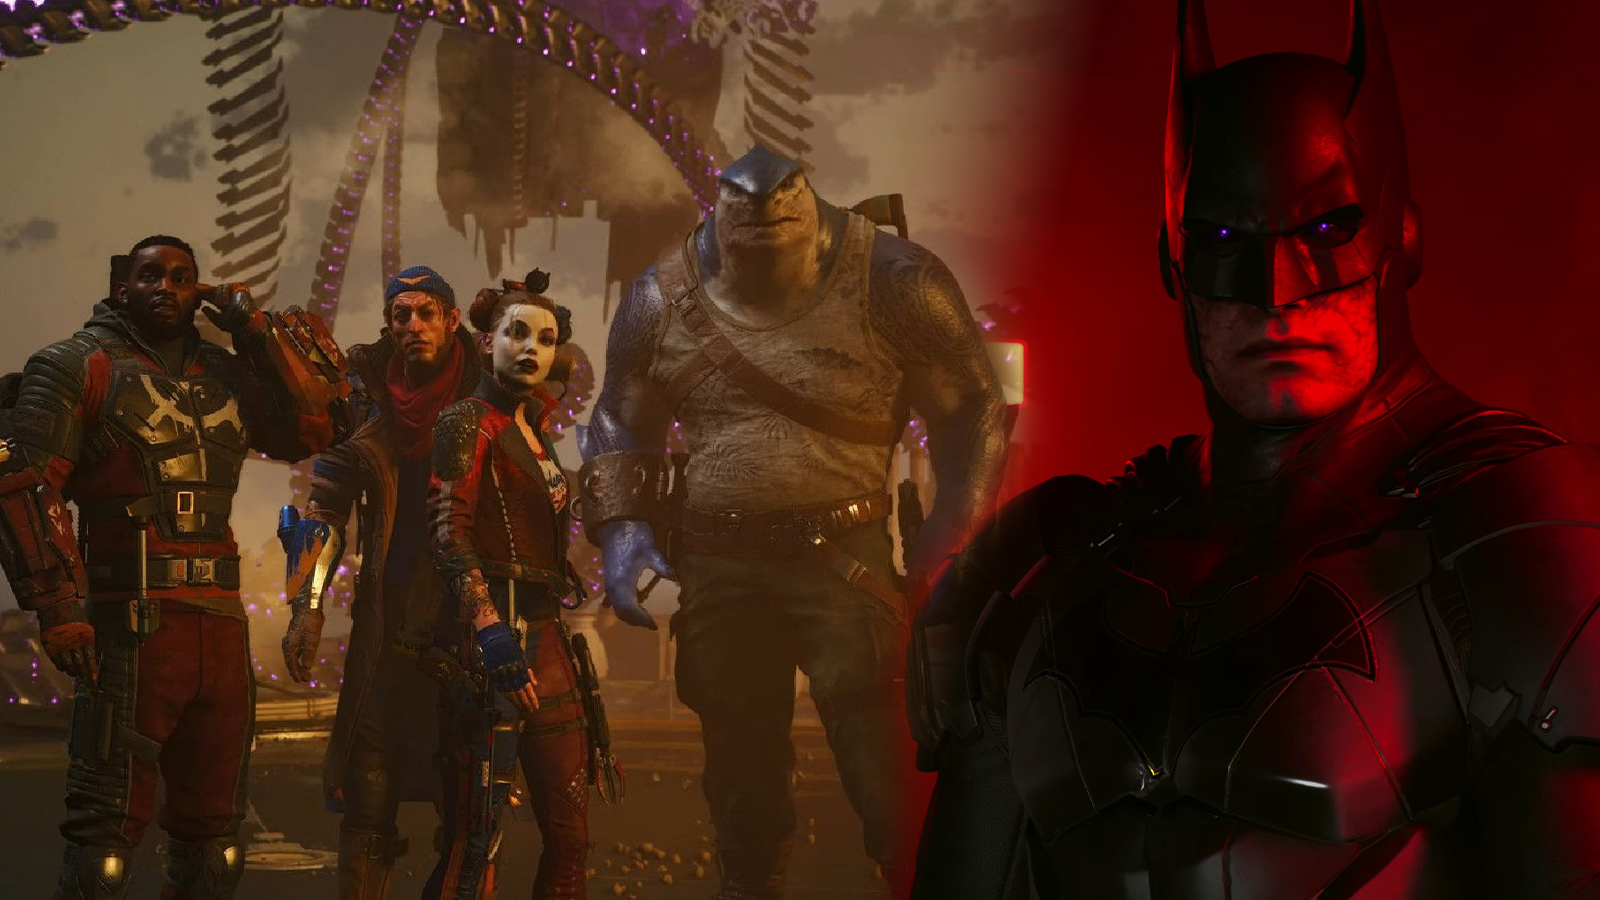 Game Awards 2022 Reveals Batman in Suicide Squad: Kill The Justice